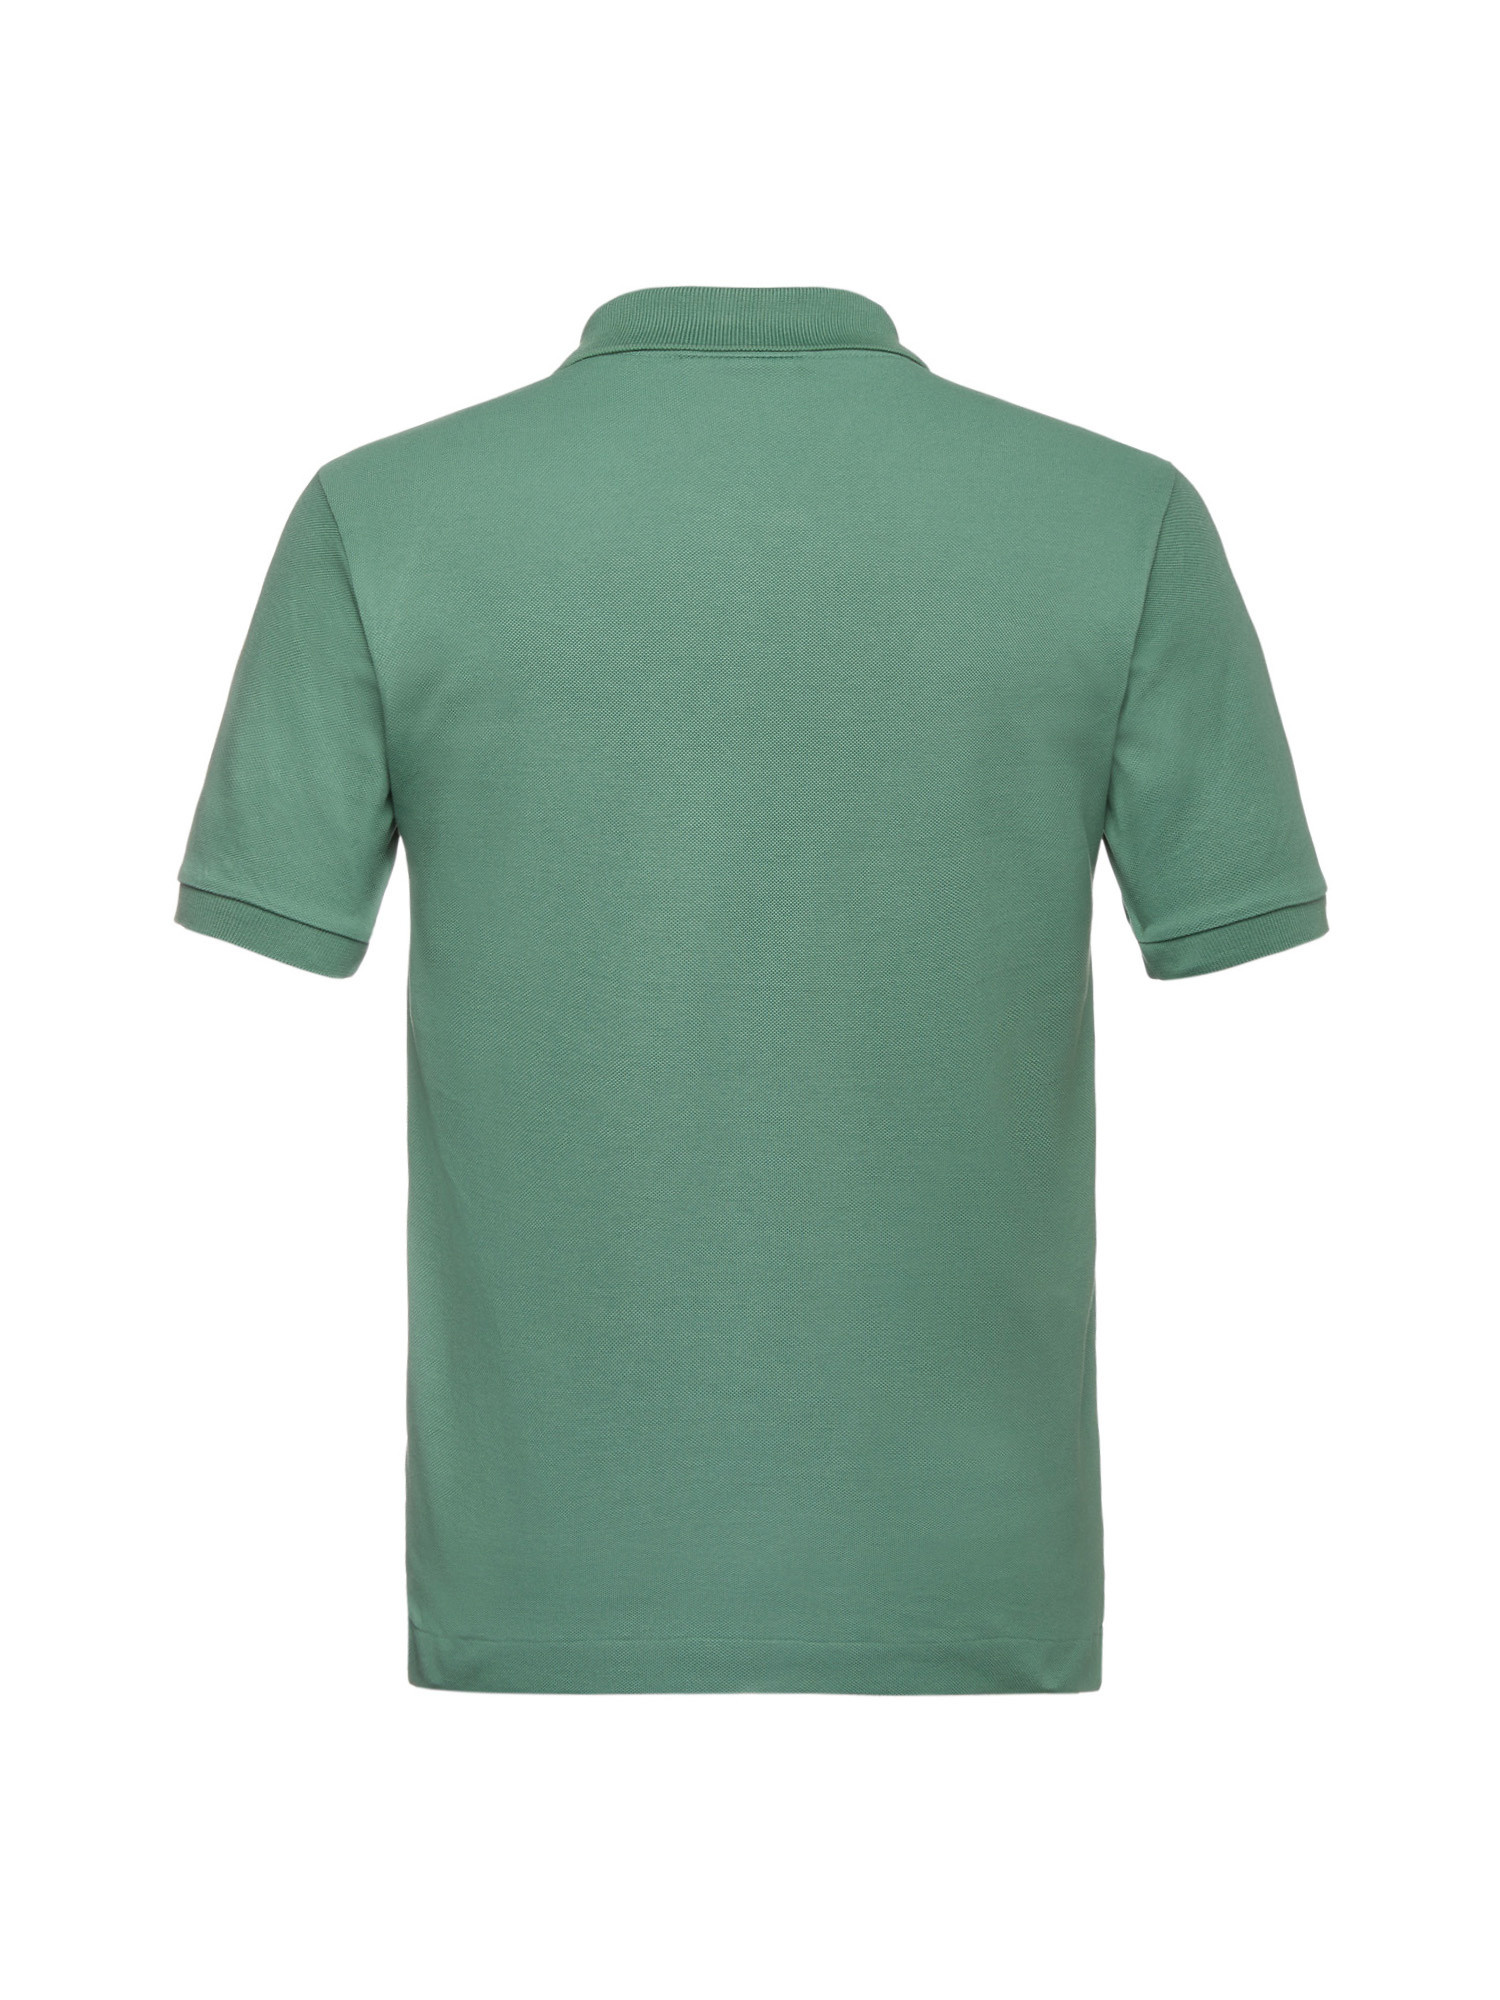 Lacoste - Classic cut polo shirt in petit piquè cotton, Sage Green, large image number 1